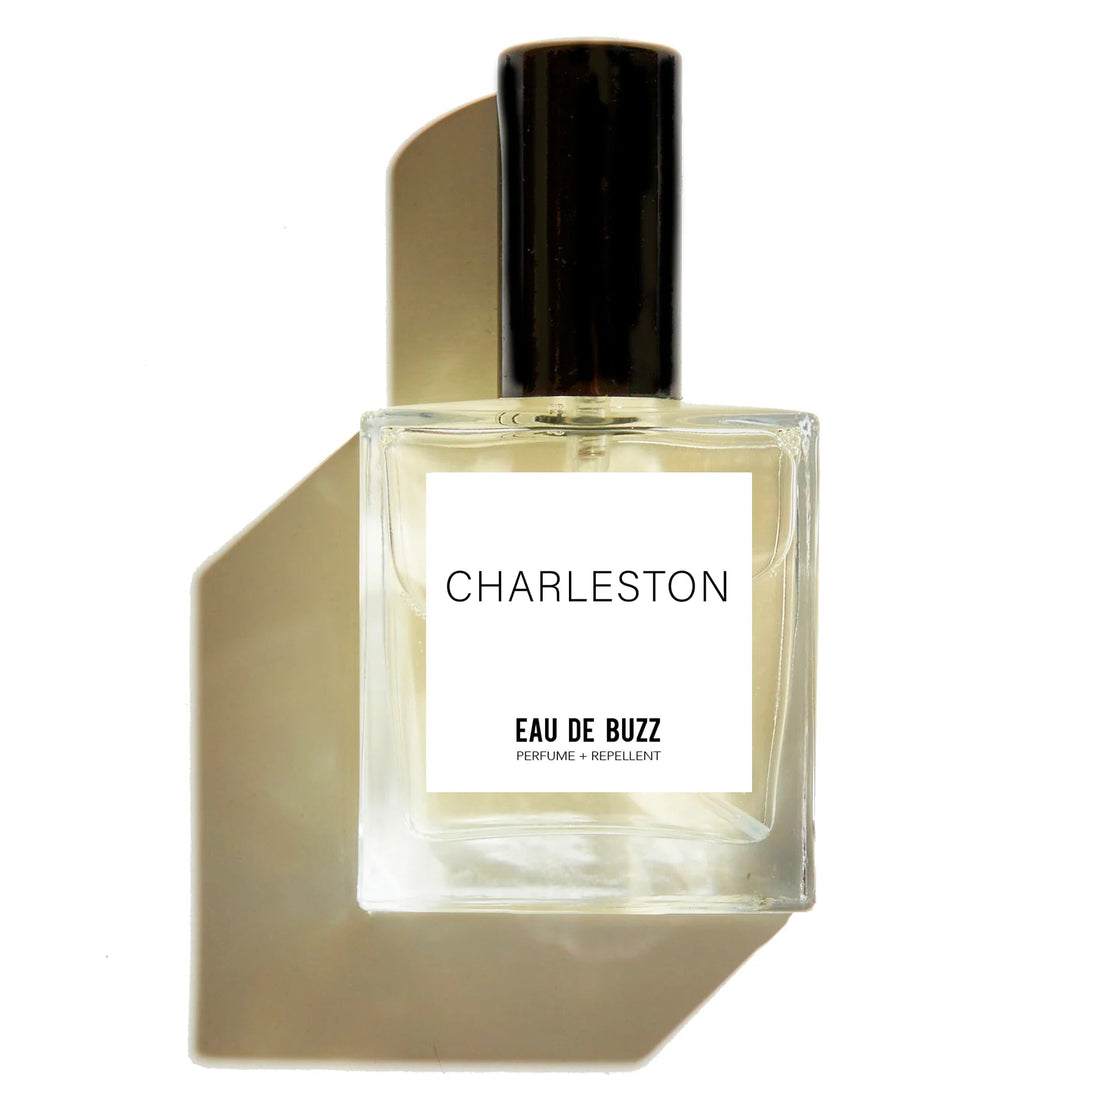 Charleston Eau de Buz Perfume and Repellent - The Look and Co